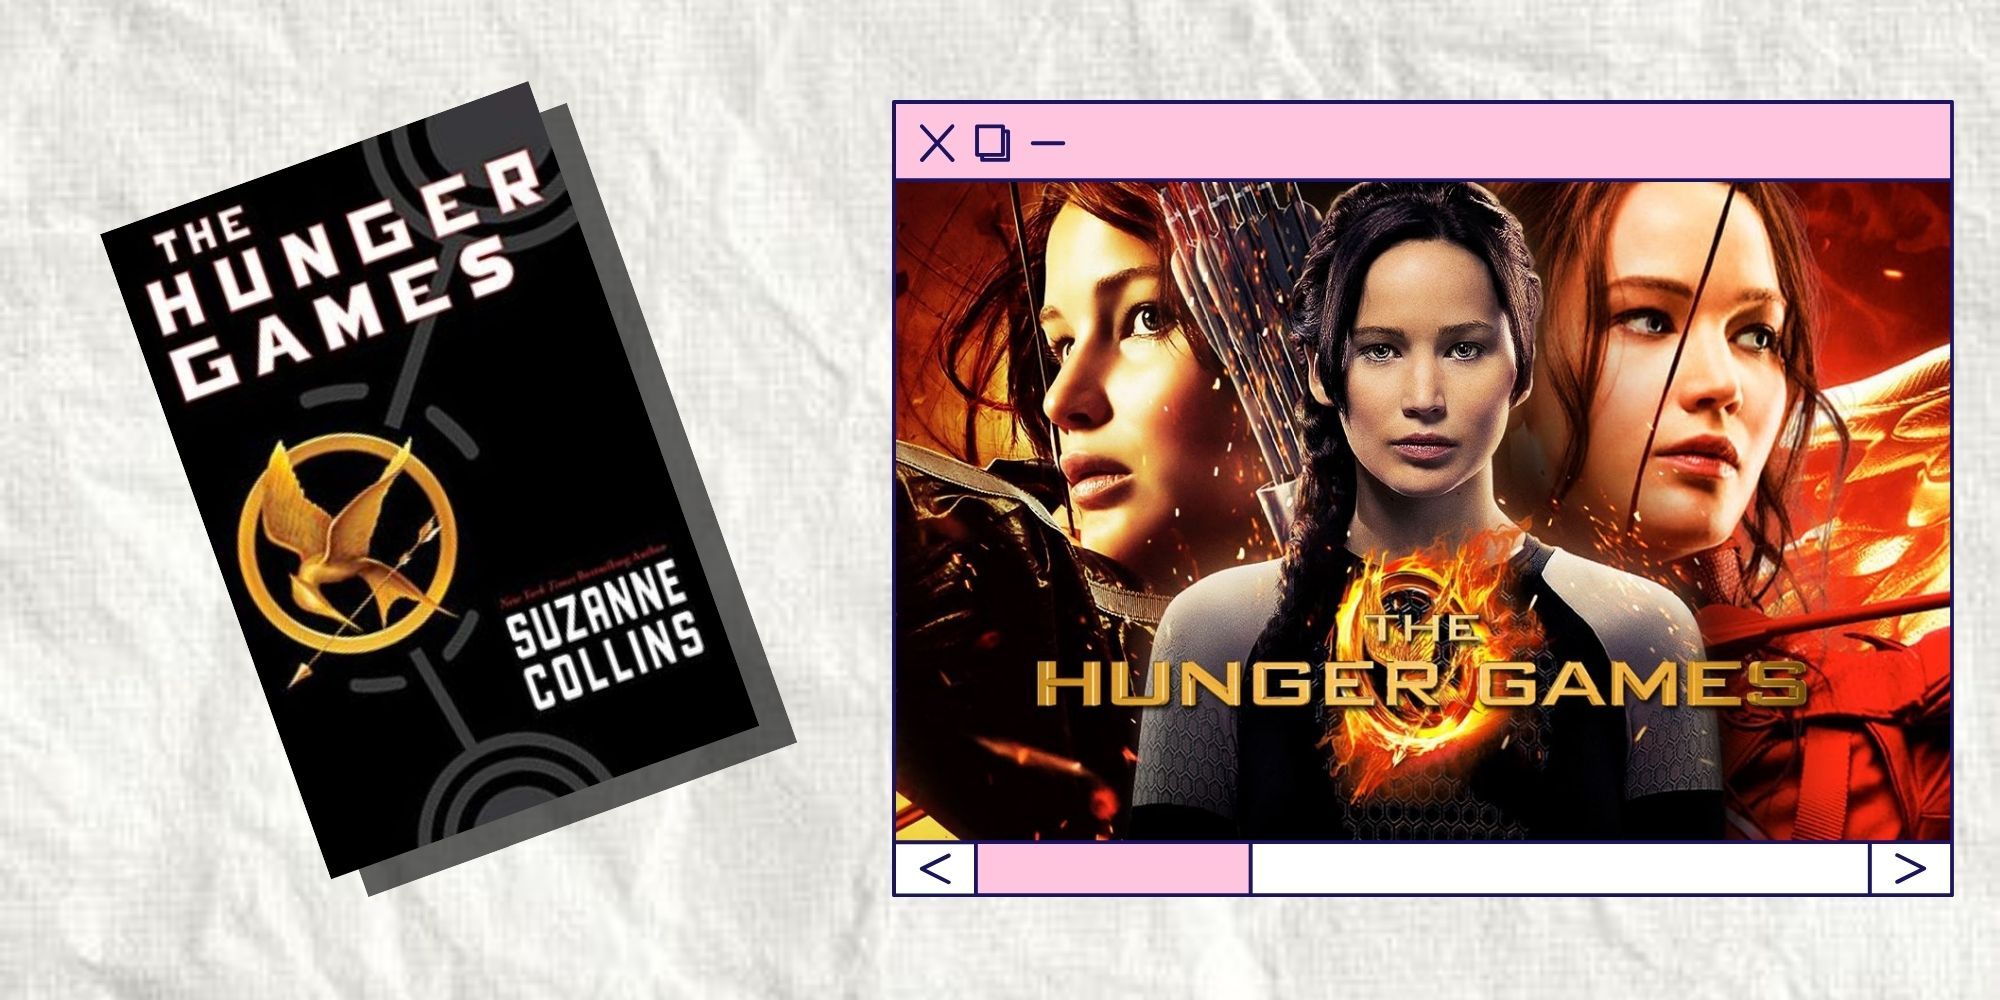 The Hunger Games book placed next to a phone with the Netflix app